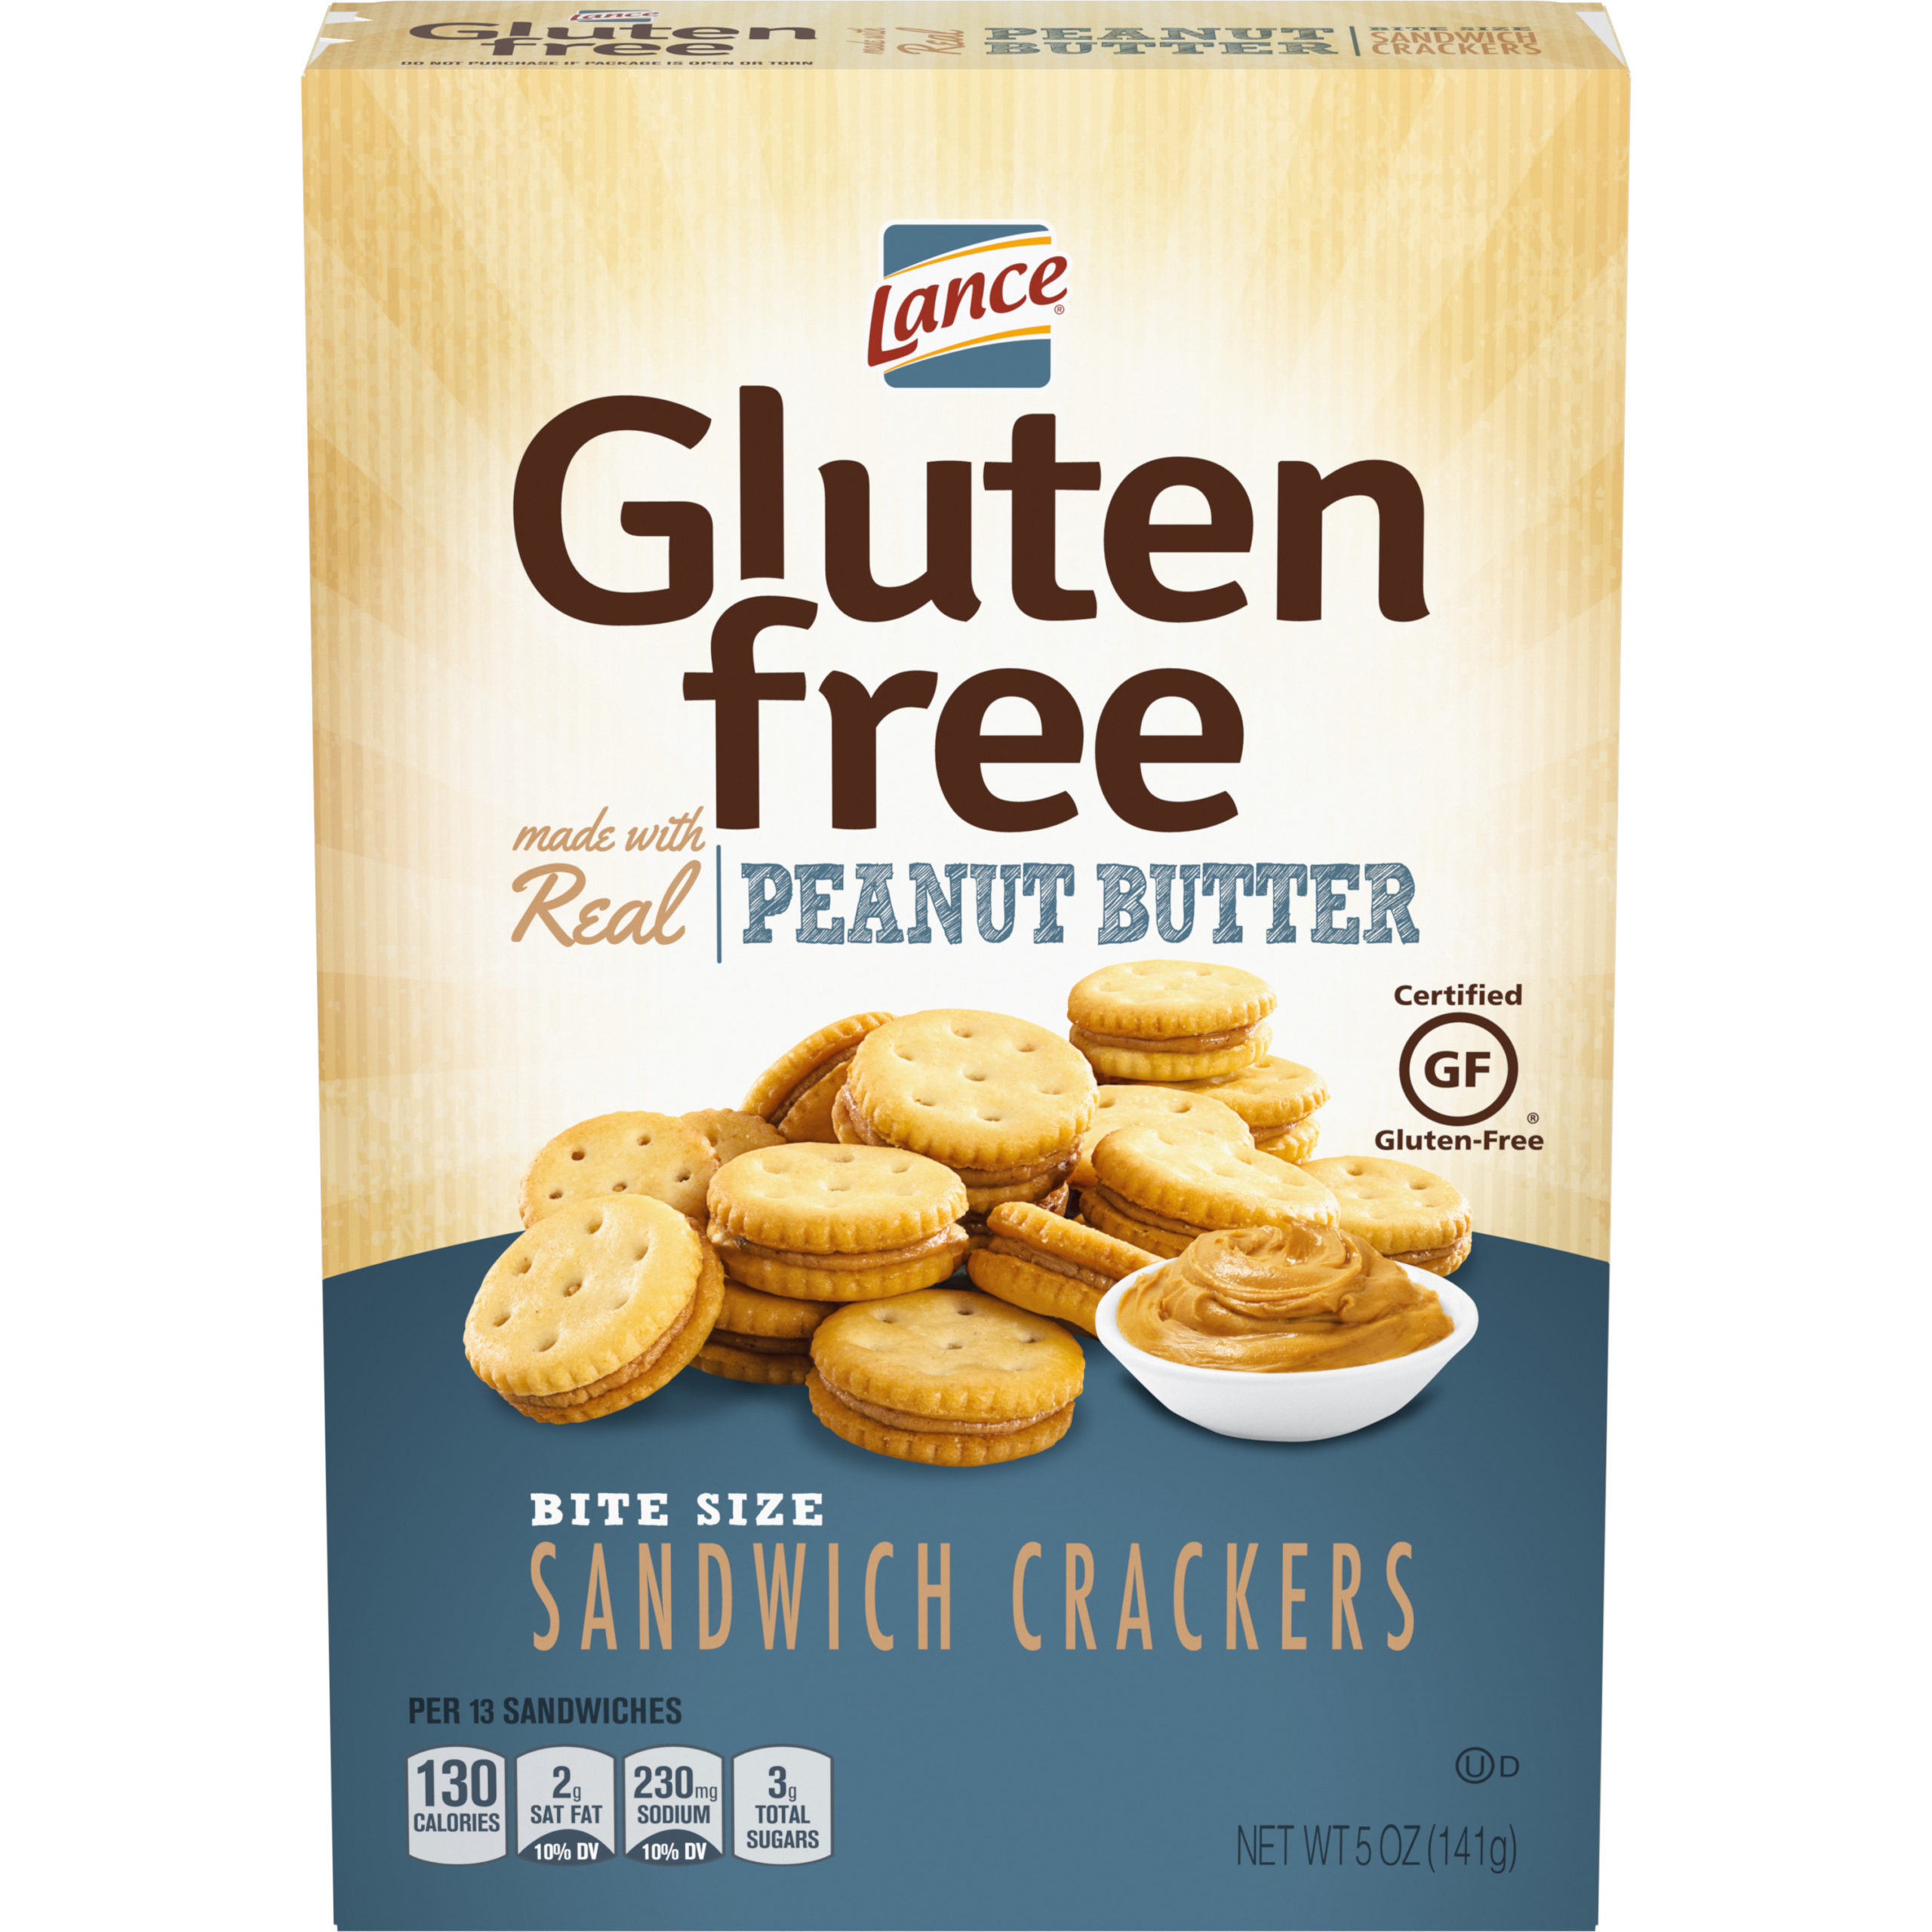 are-peanuts-gluten-free-clearance-outlet-save-63-jlcatj-gob-mx